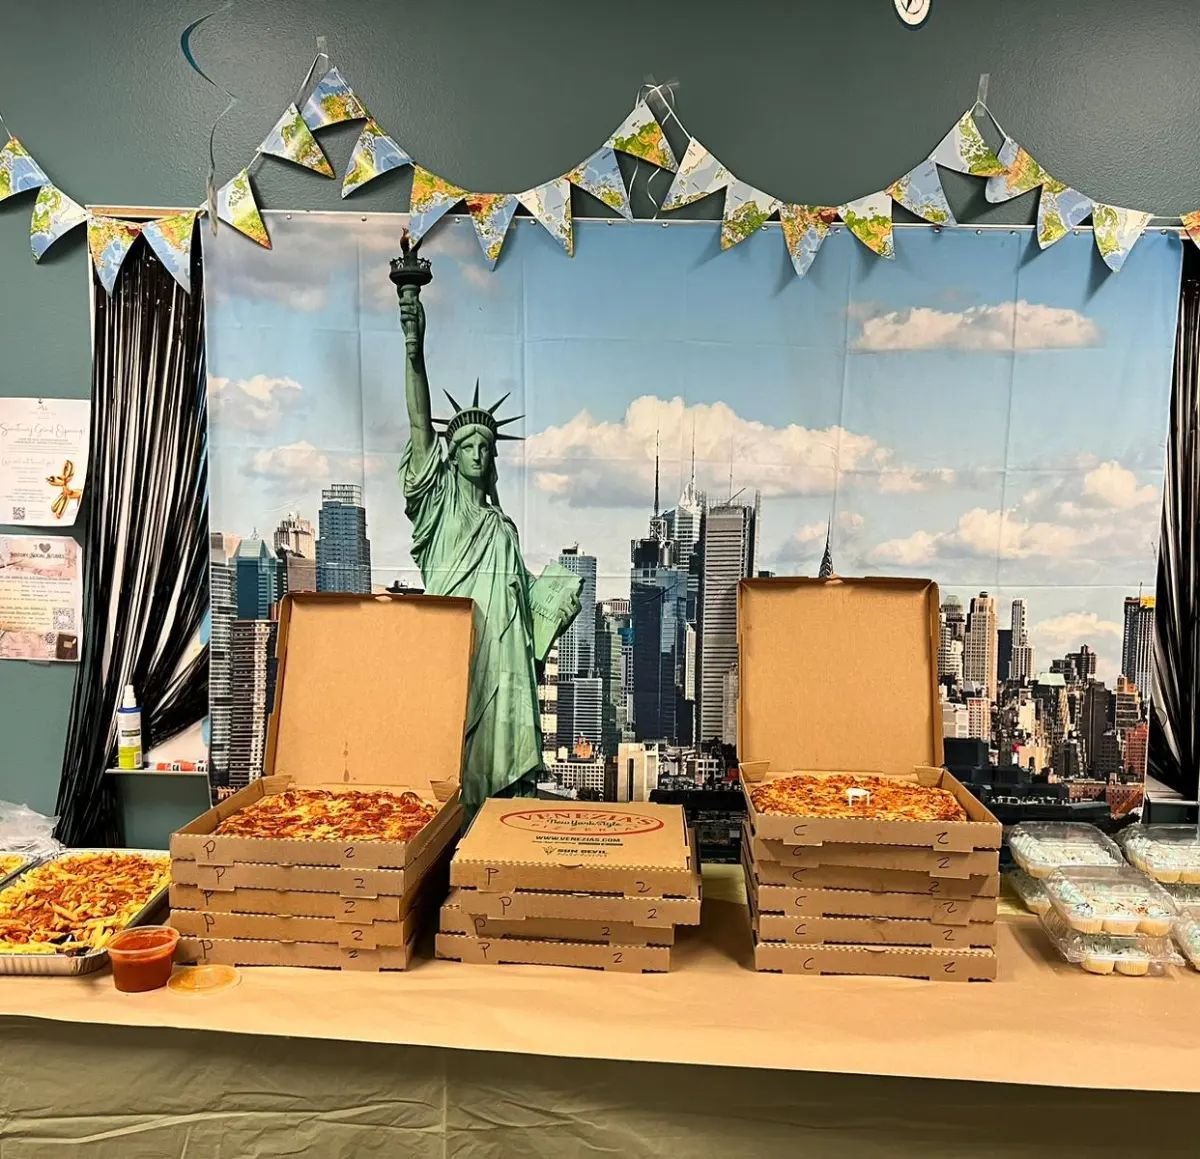 Our staff was in an Empire State of Mind during their stop in the Big Apple this afternoon enjoying pizza and pasta from @veneziaspizza (PV) and cupcakes provided by @sugarandlacebakery . Thank you both for your generosity!!